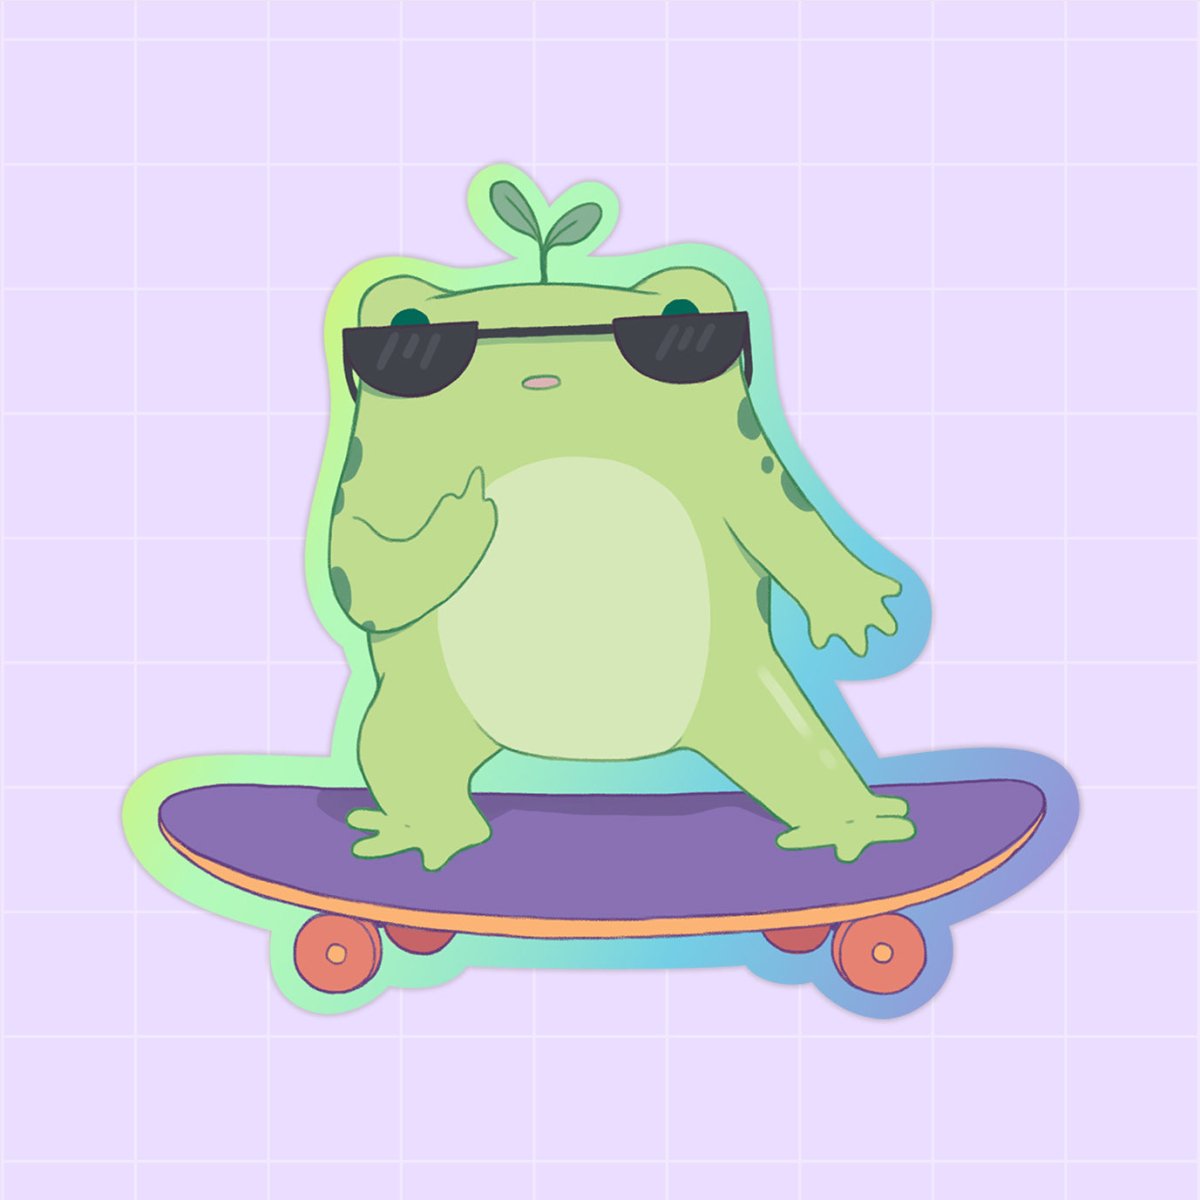 holographic sticker, die cut sticker, frogs, skater sticker, new stationery shop, cute stationery, quality stationery, sticker for sale, too cool for school, fun merch, fun stationery, unique art shop, 